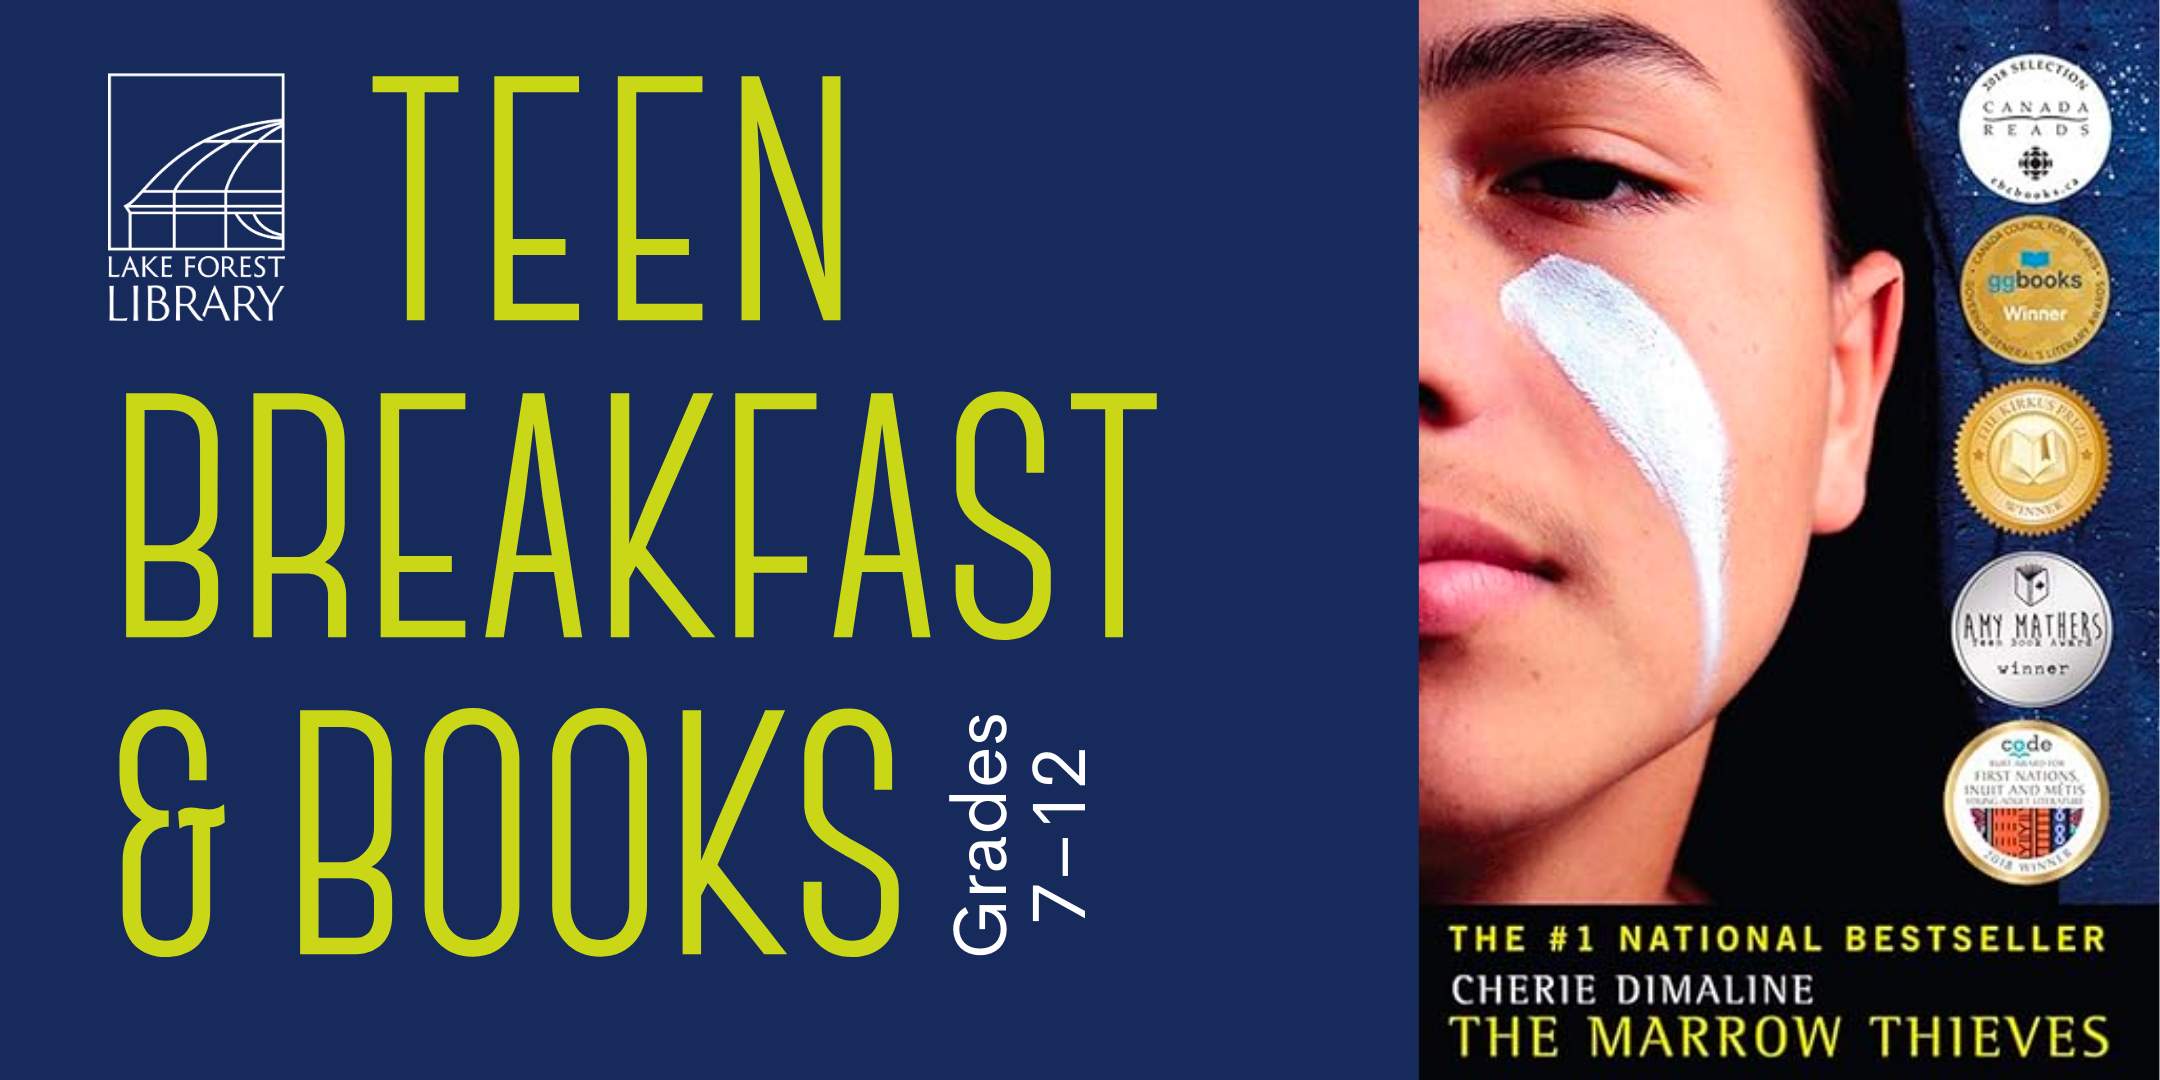 image of "Teen Breakfast & Books: The Marrow Thieves"